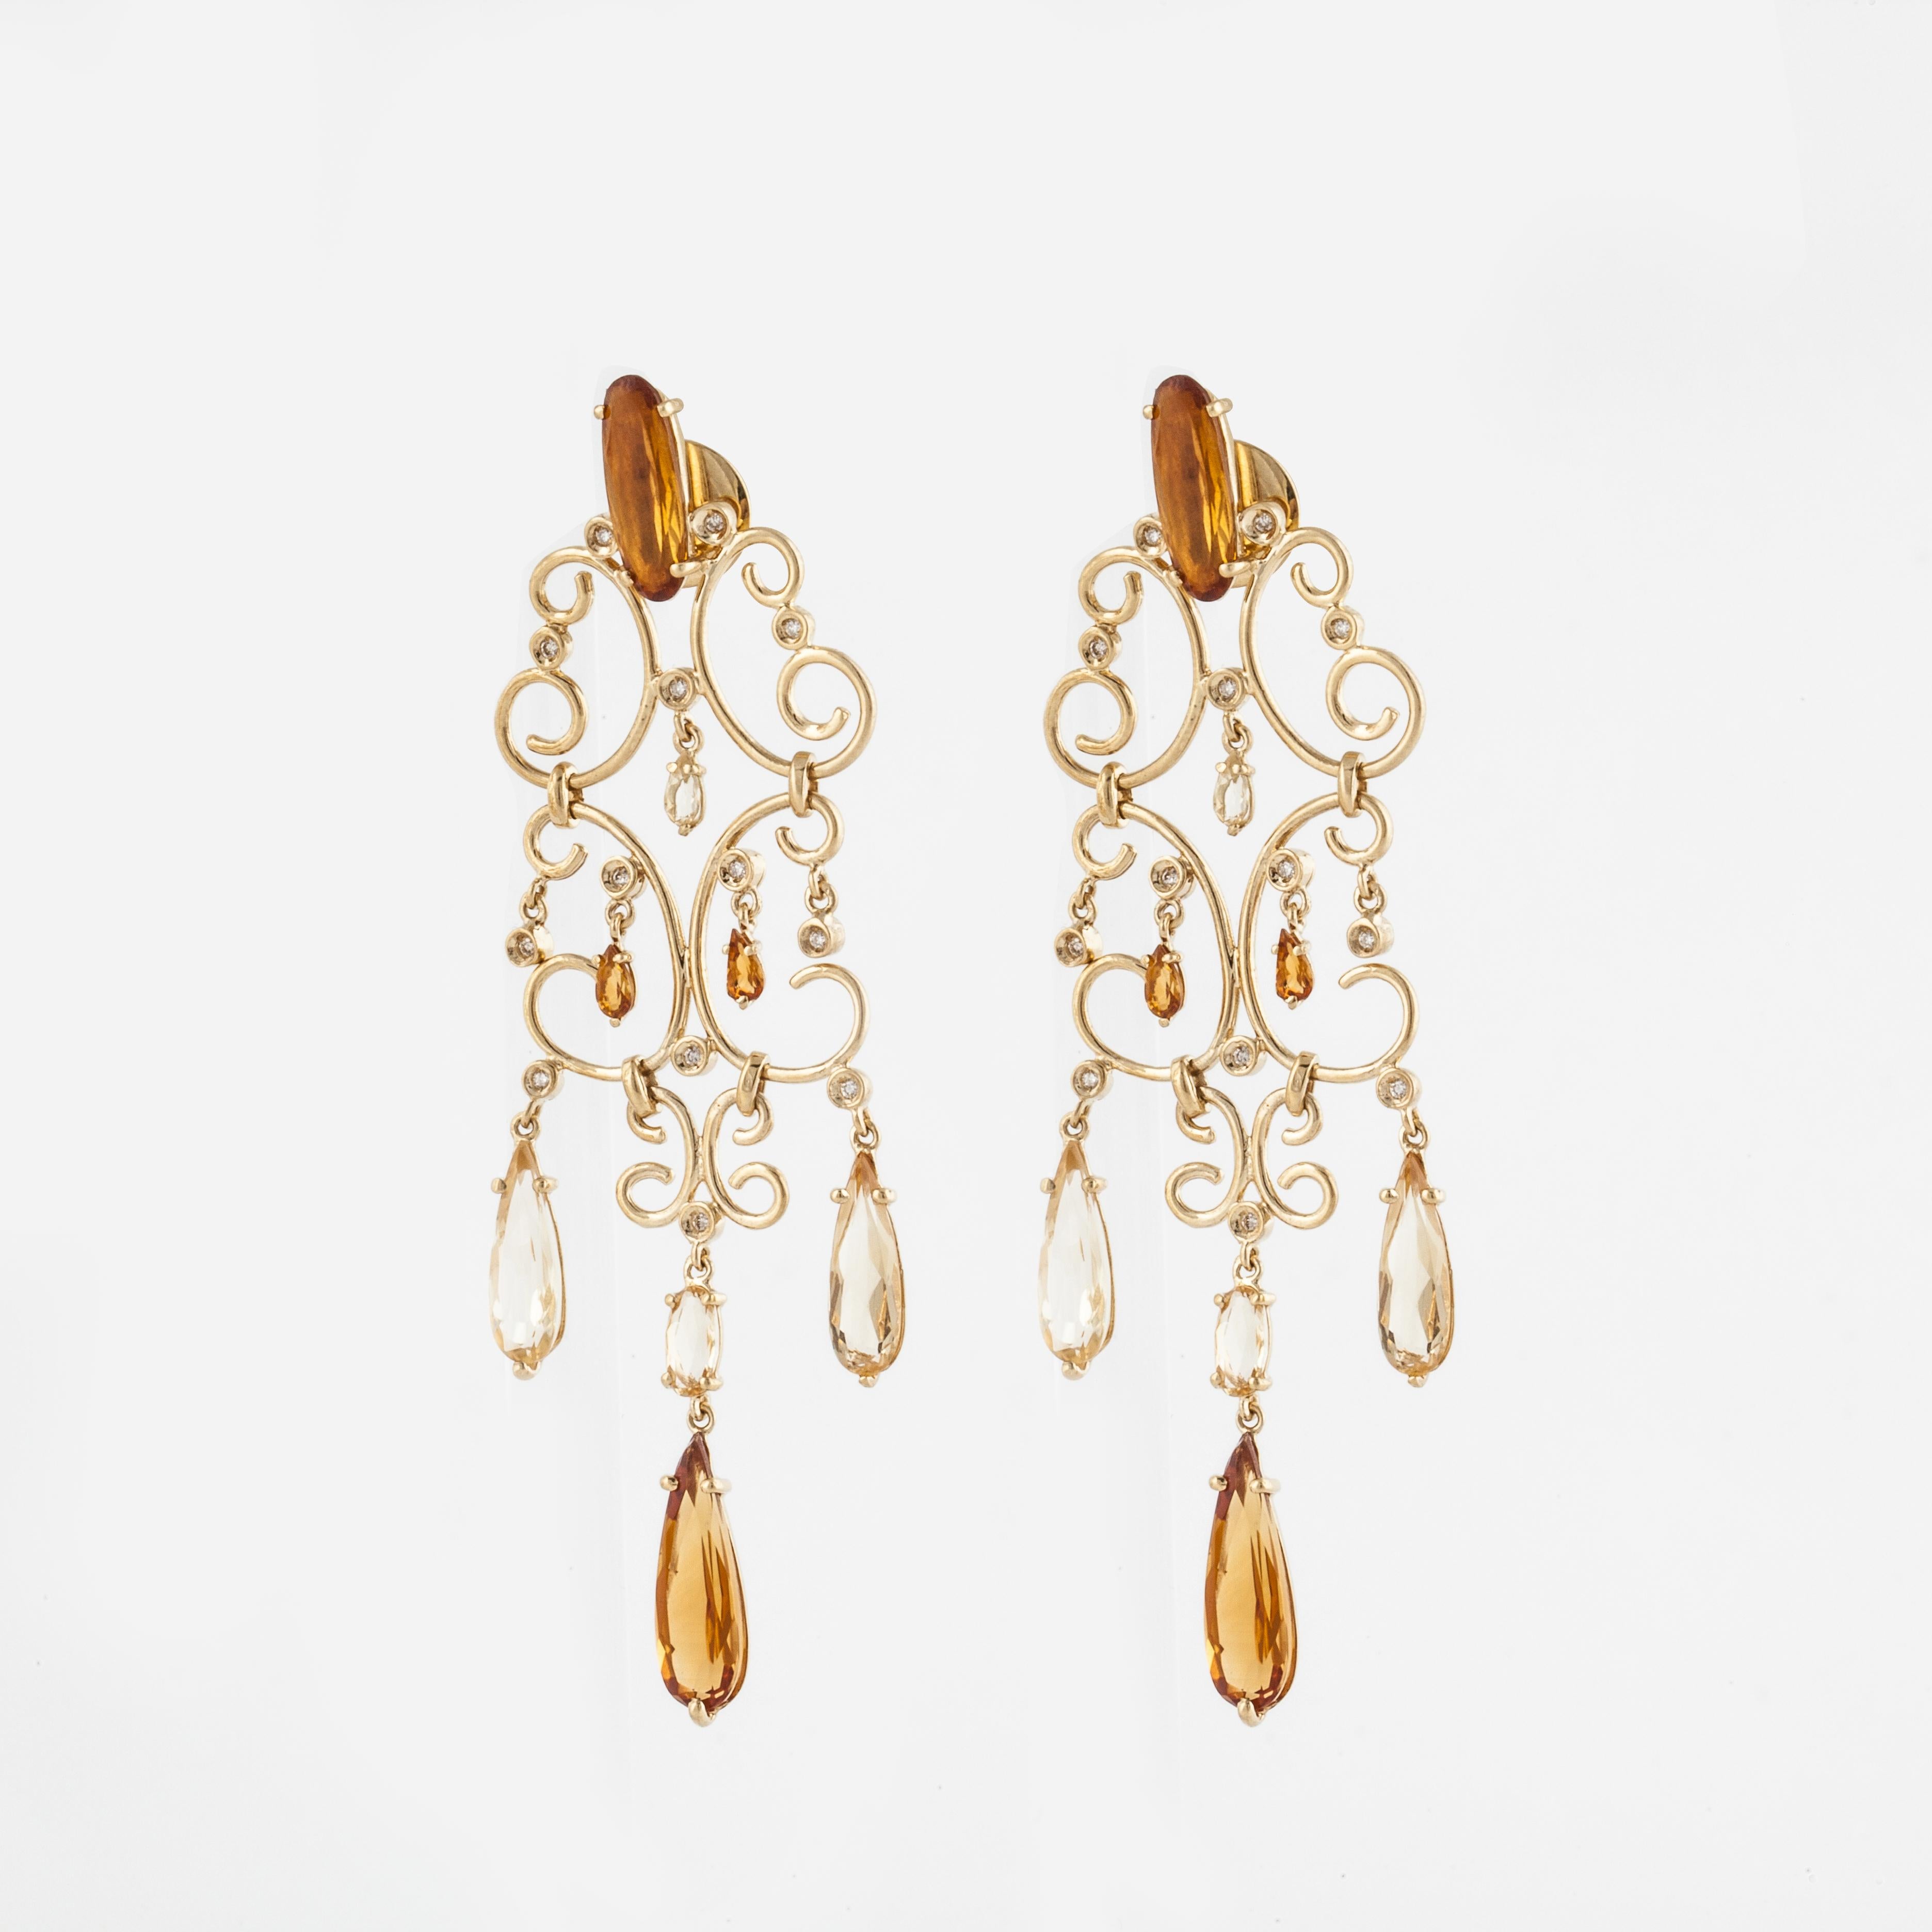 18K yellow gold dangle earrings featuring citrines.  There are 16 citrines that total 10.20 carats.  There are 26 round bezel-set diamonds that total 0.25; G-H color and VS clarity.  Measure 2 7/8 inches long and 7/8 inches wide.  